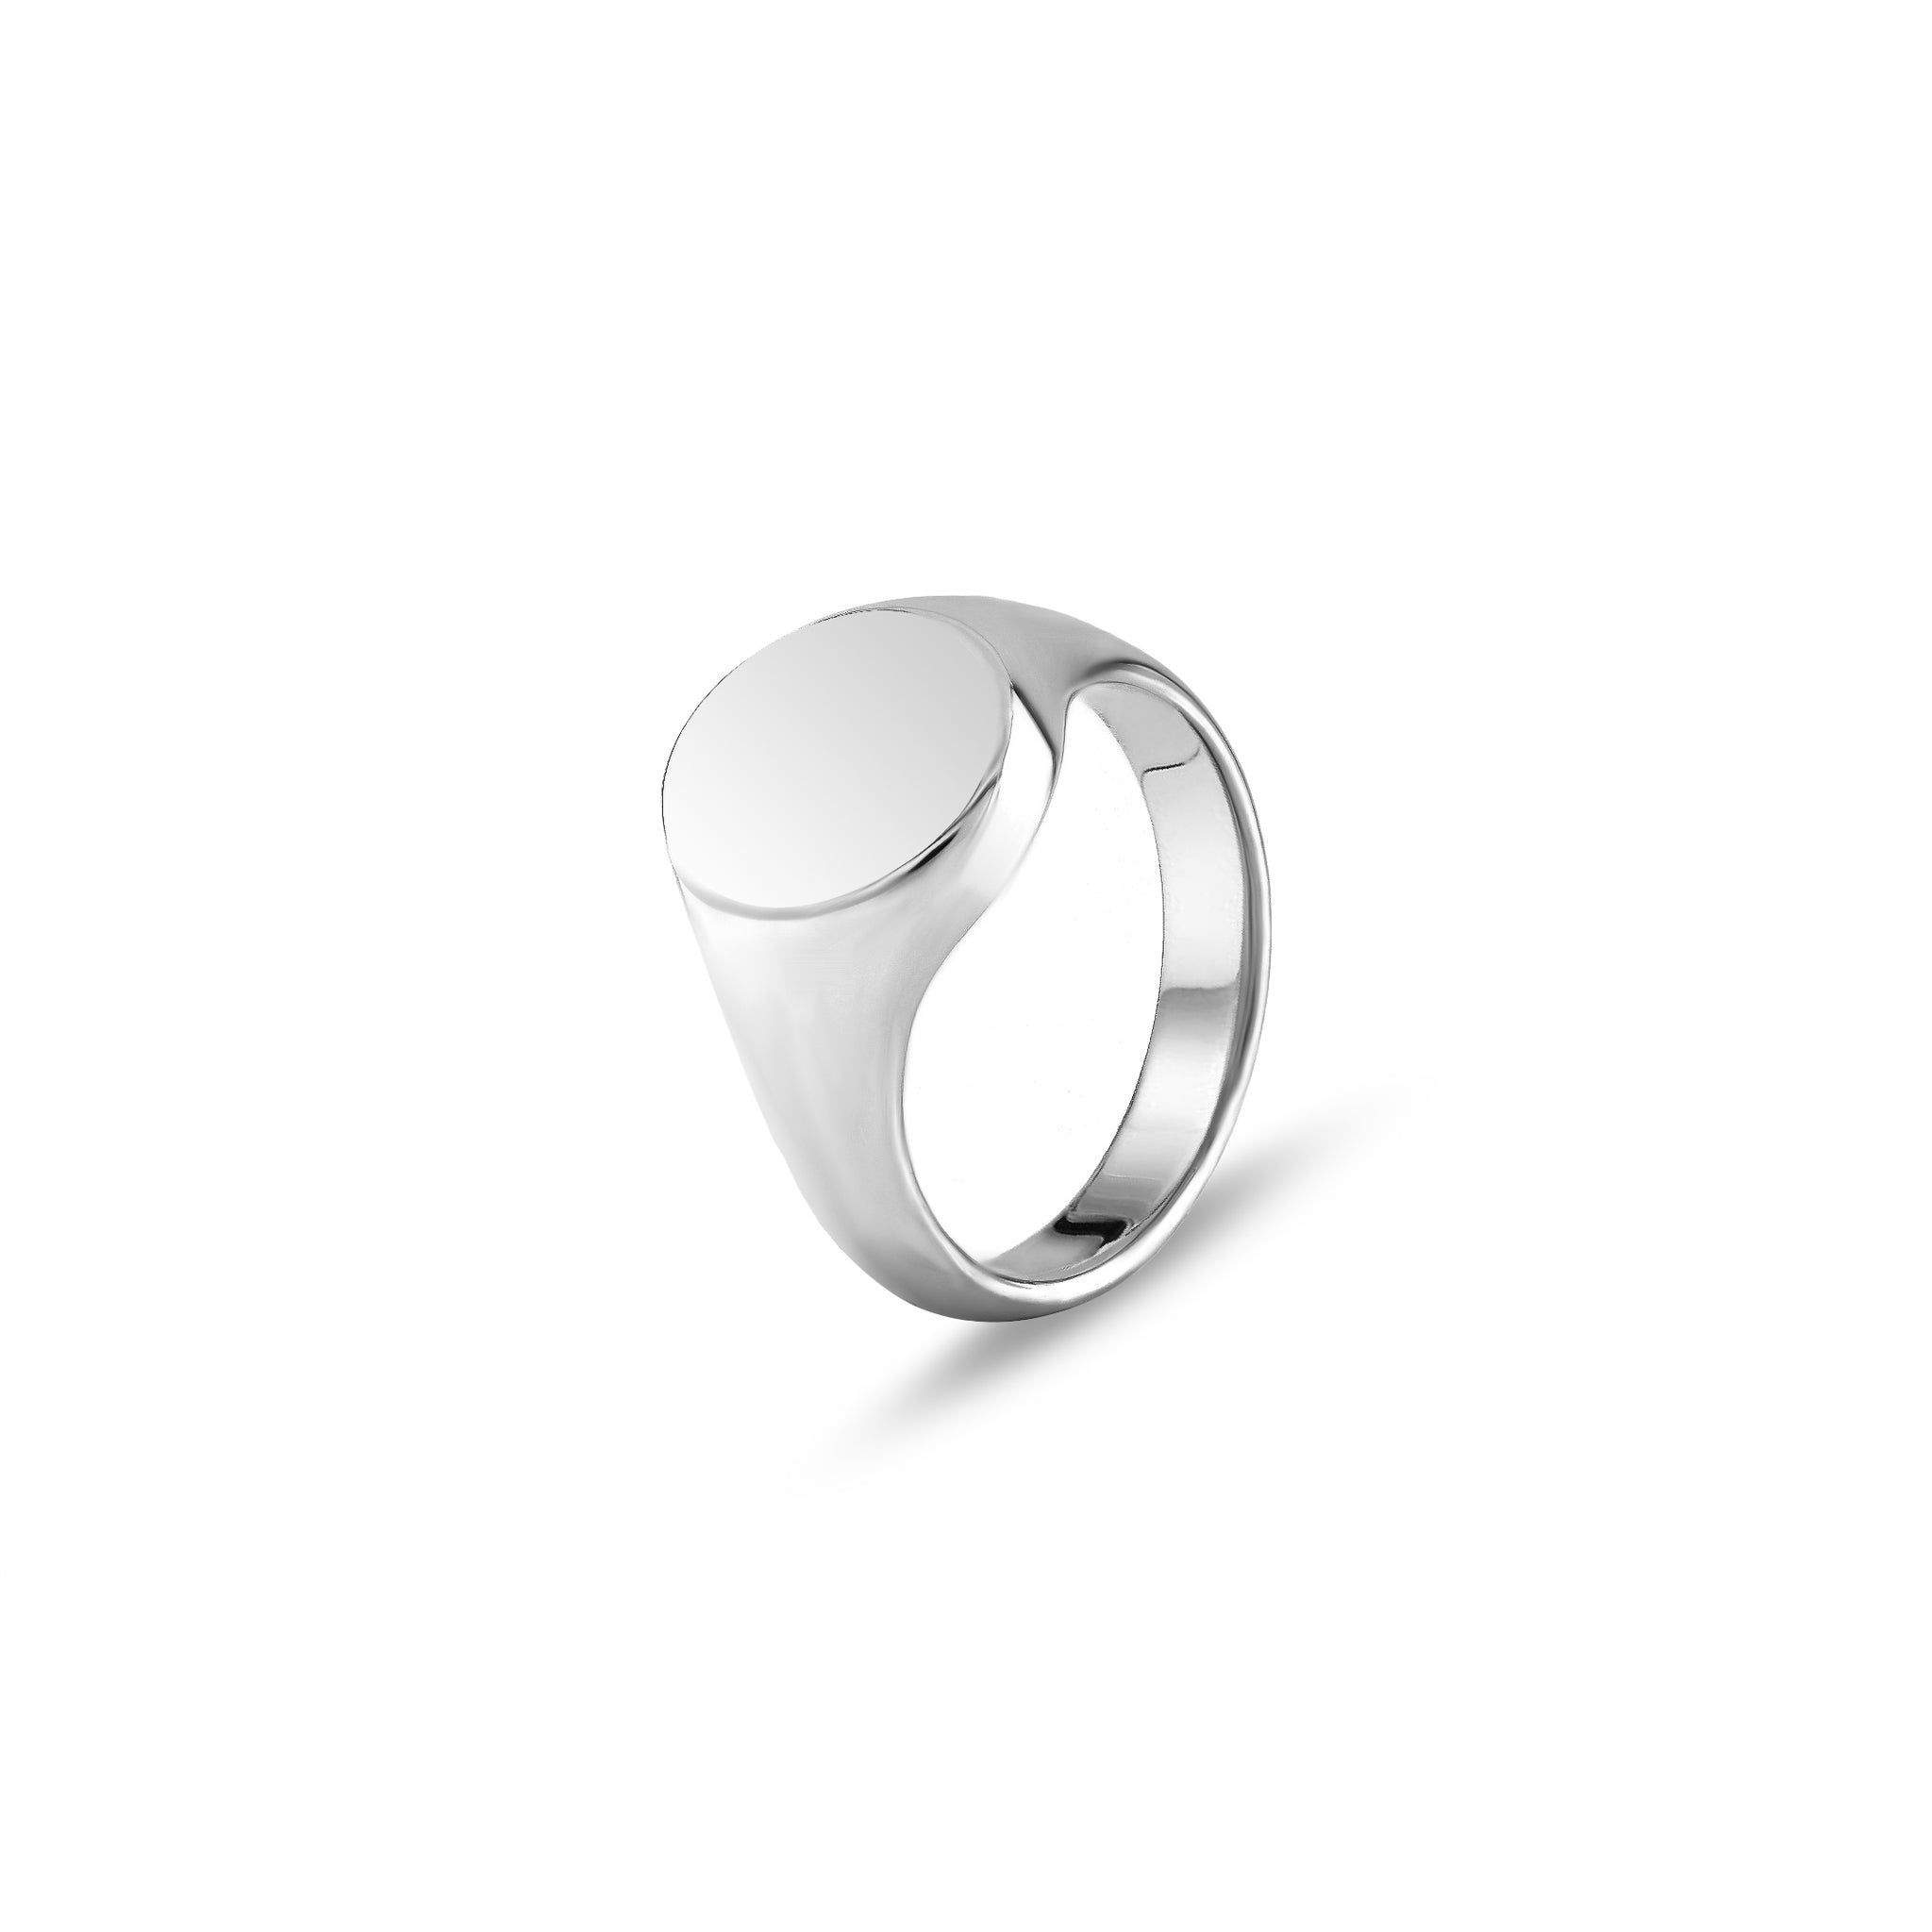 9ct White Gold 13 x 11mm Oval Signet Ring